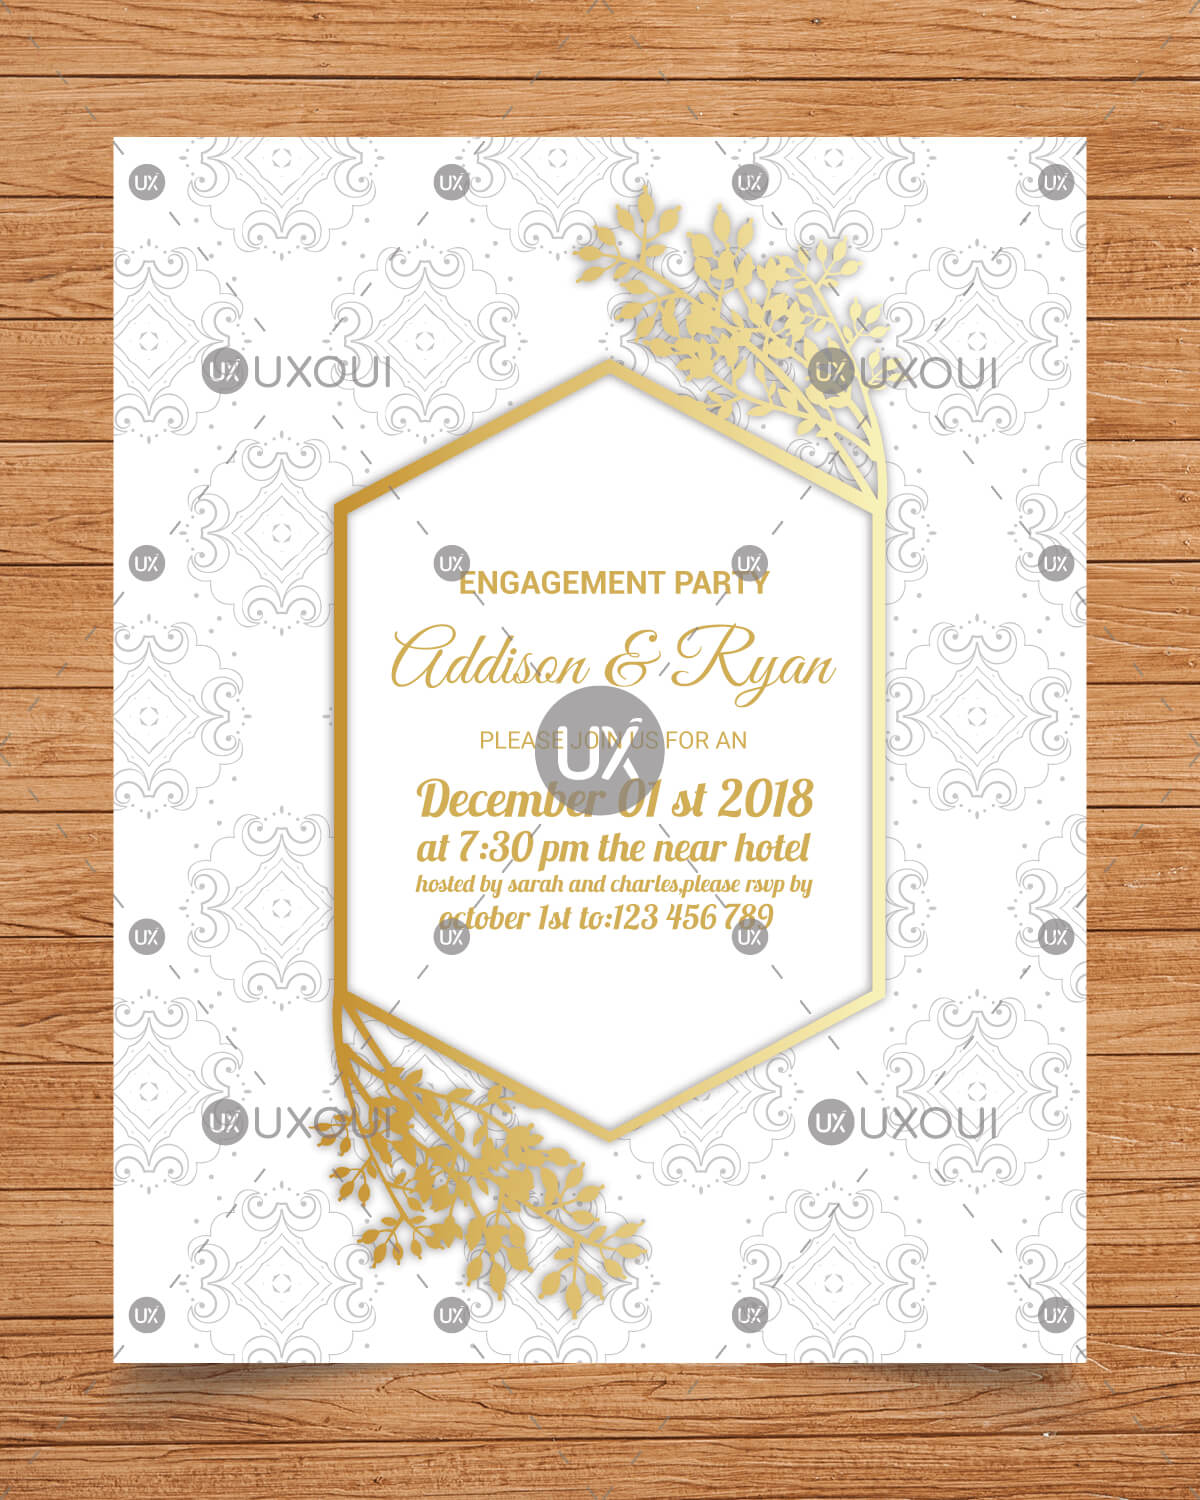 Wedding Engagement Party Invitation Card Template Design Vector With Flowers Throughout Engagement Invitation Card Template